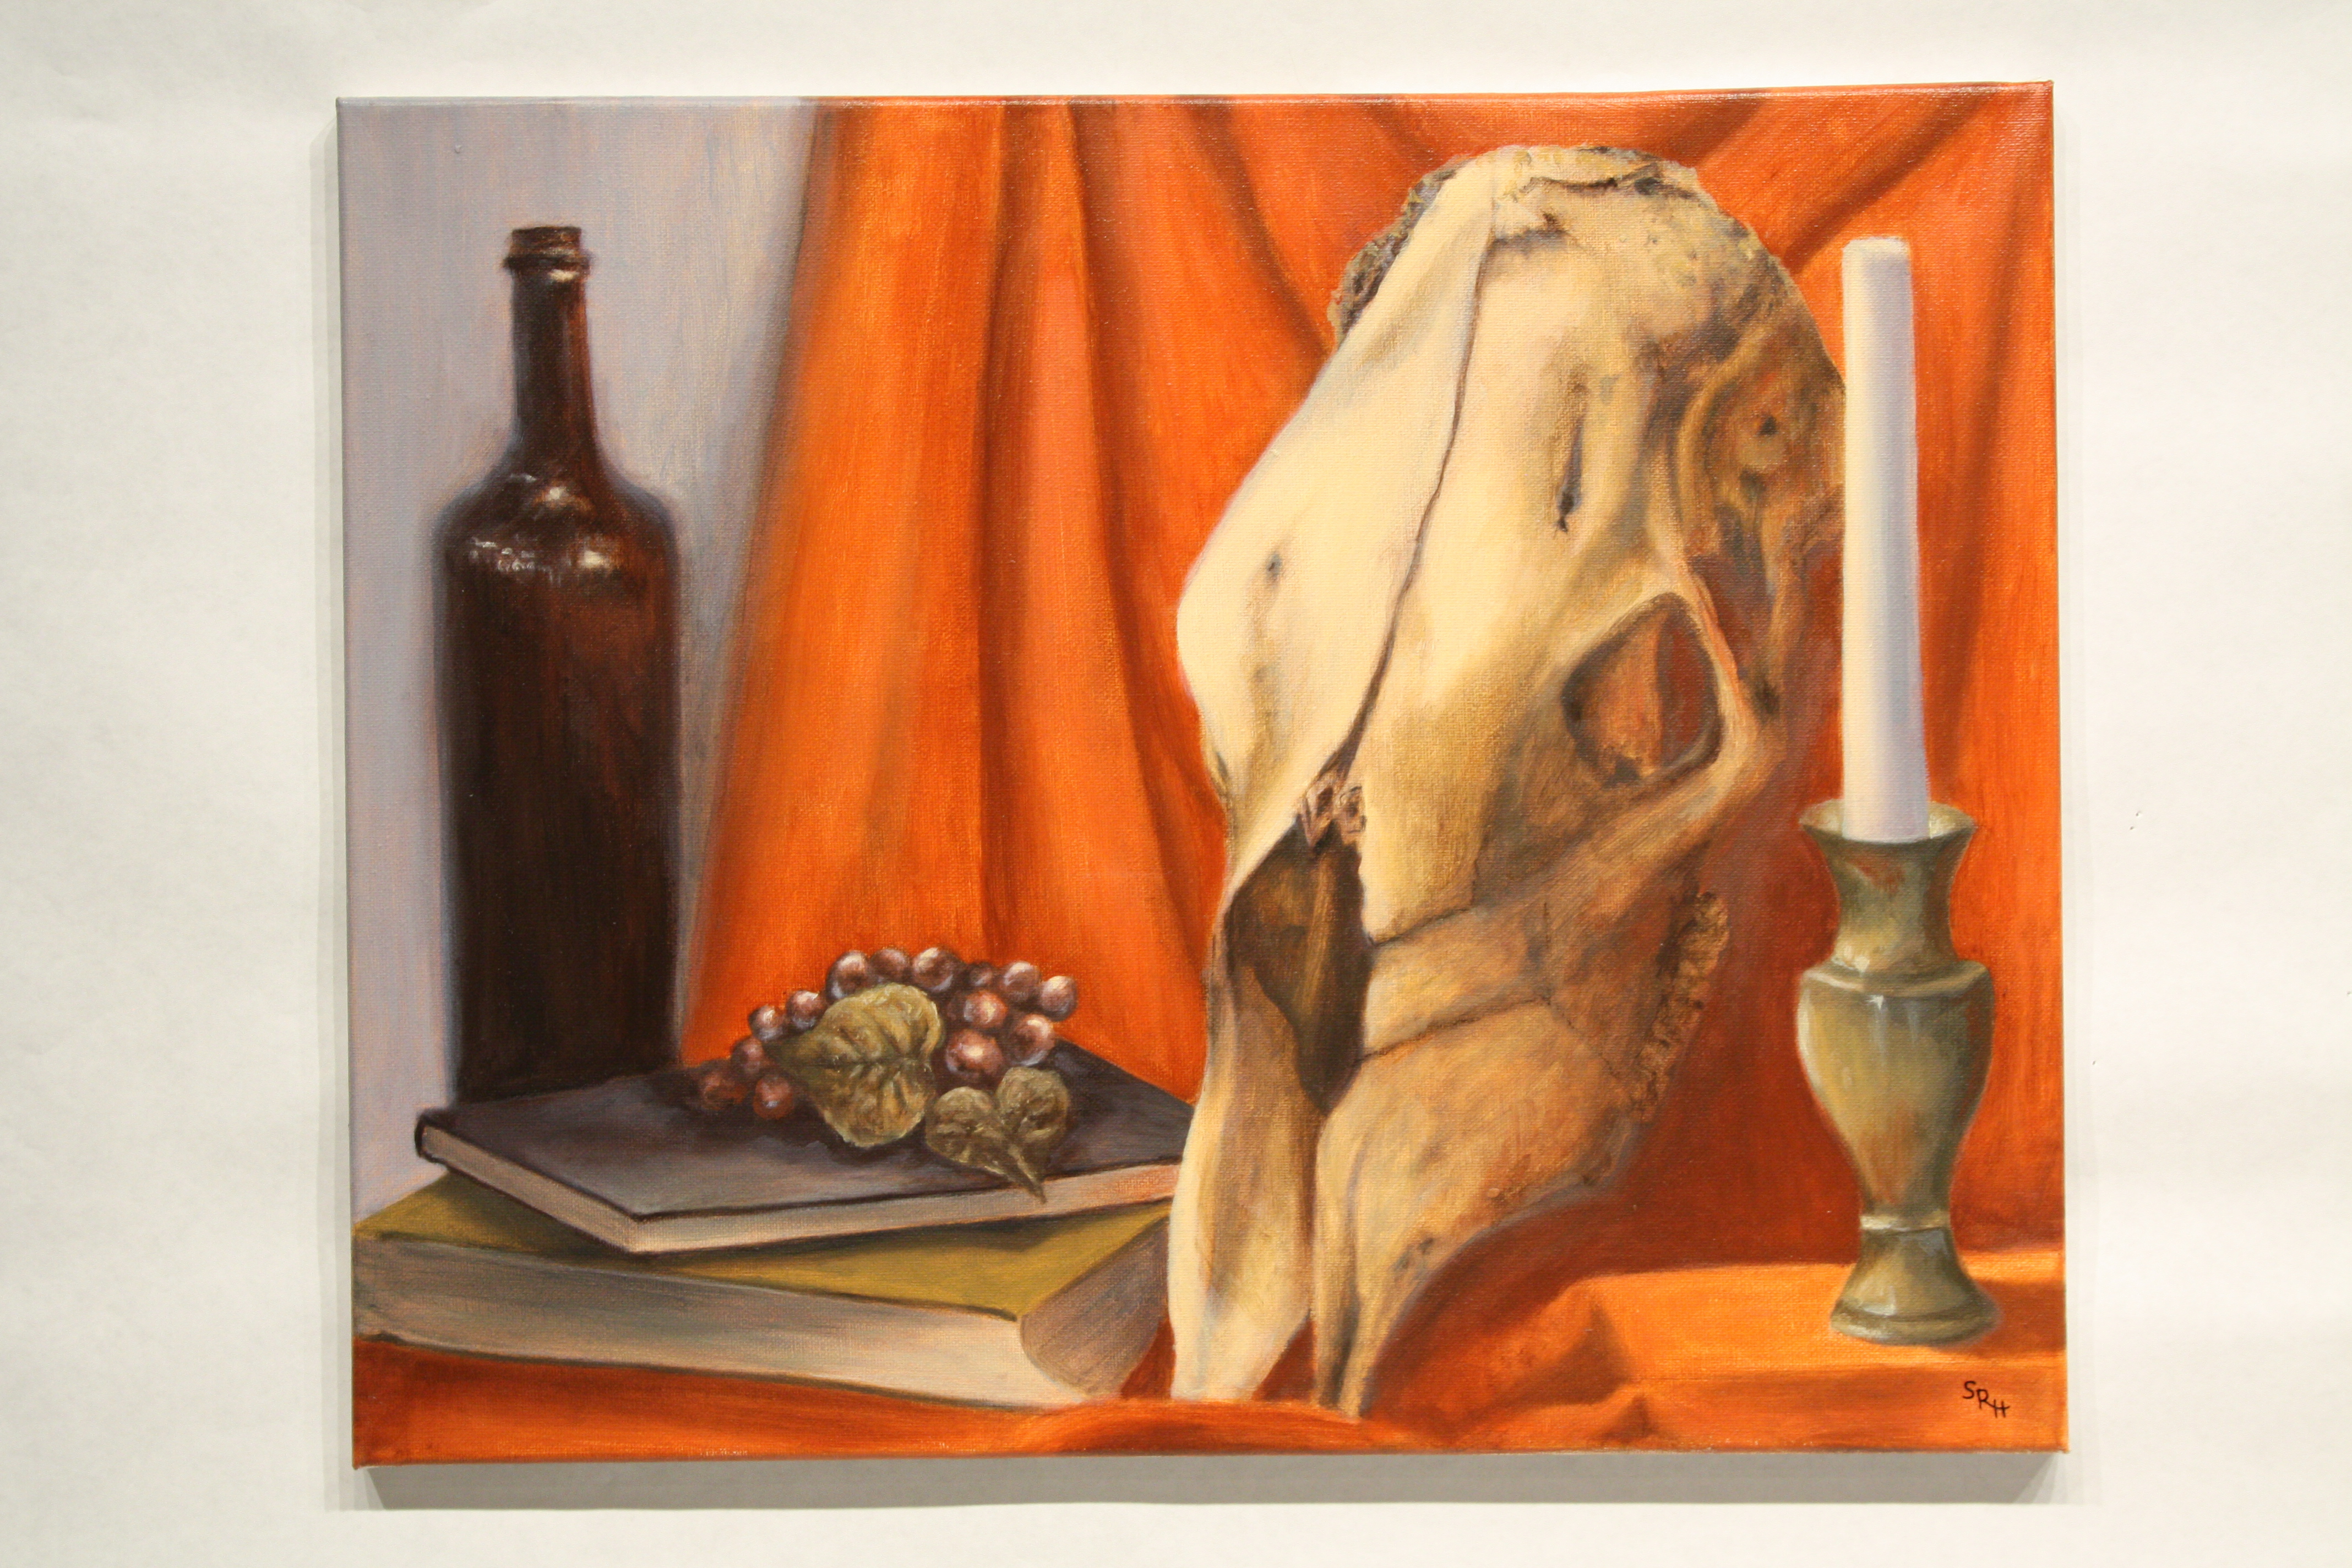 Painting of animal skull with orange drapery and candle and wine bottle.